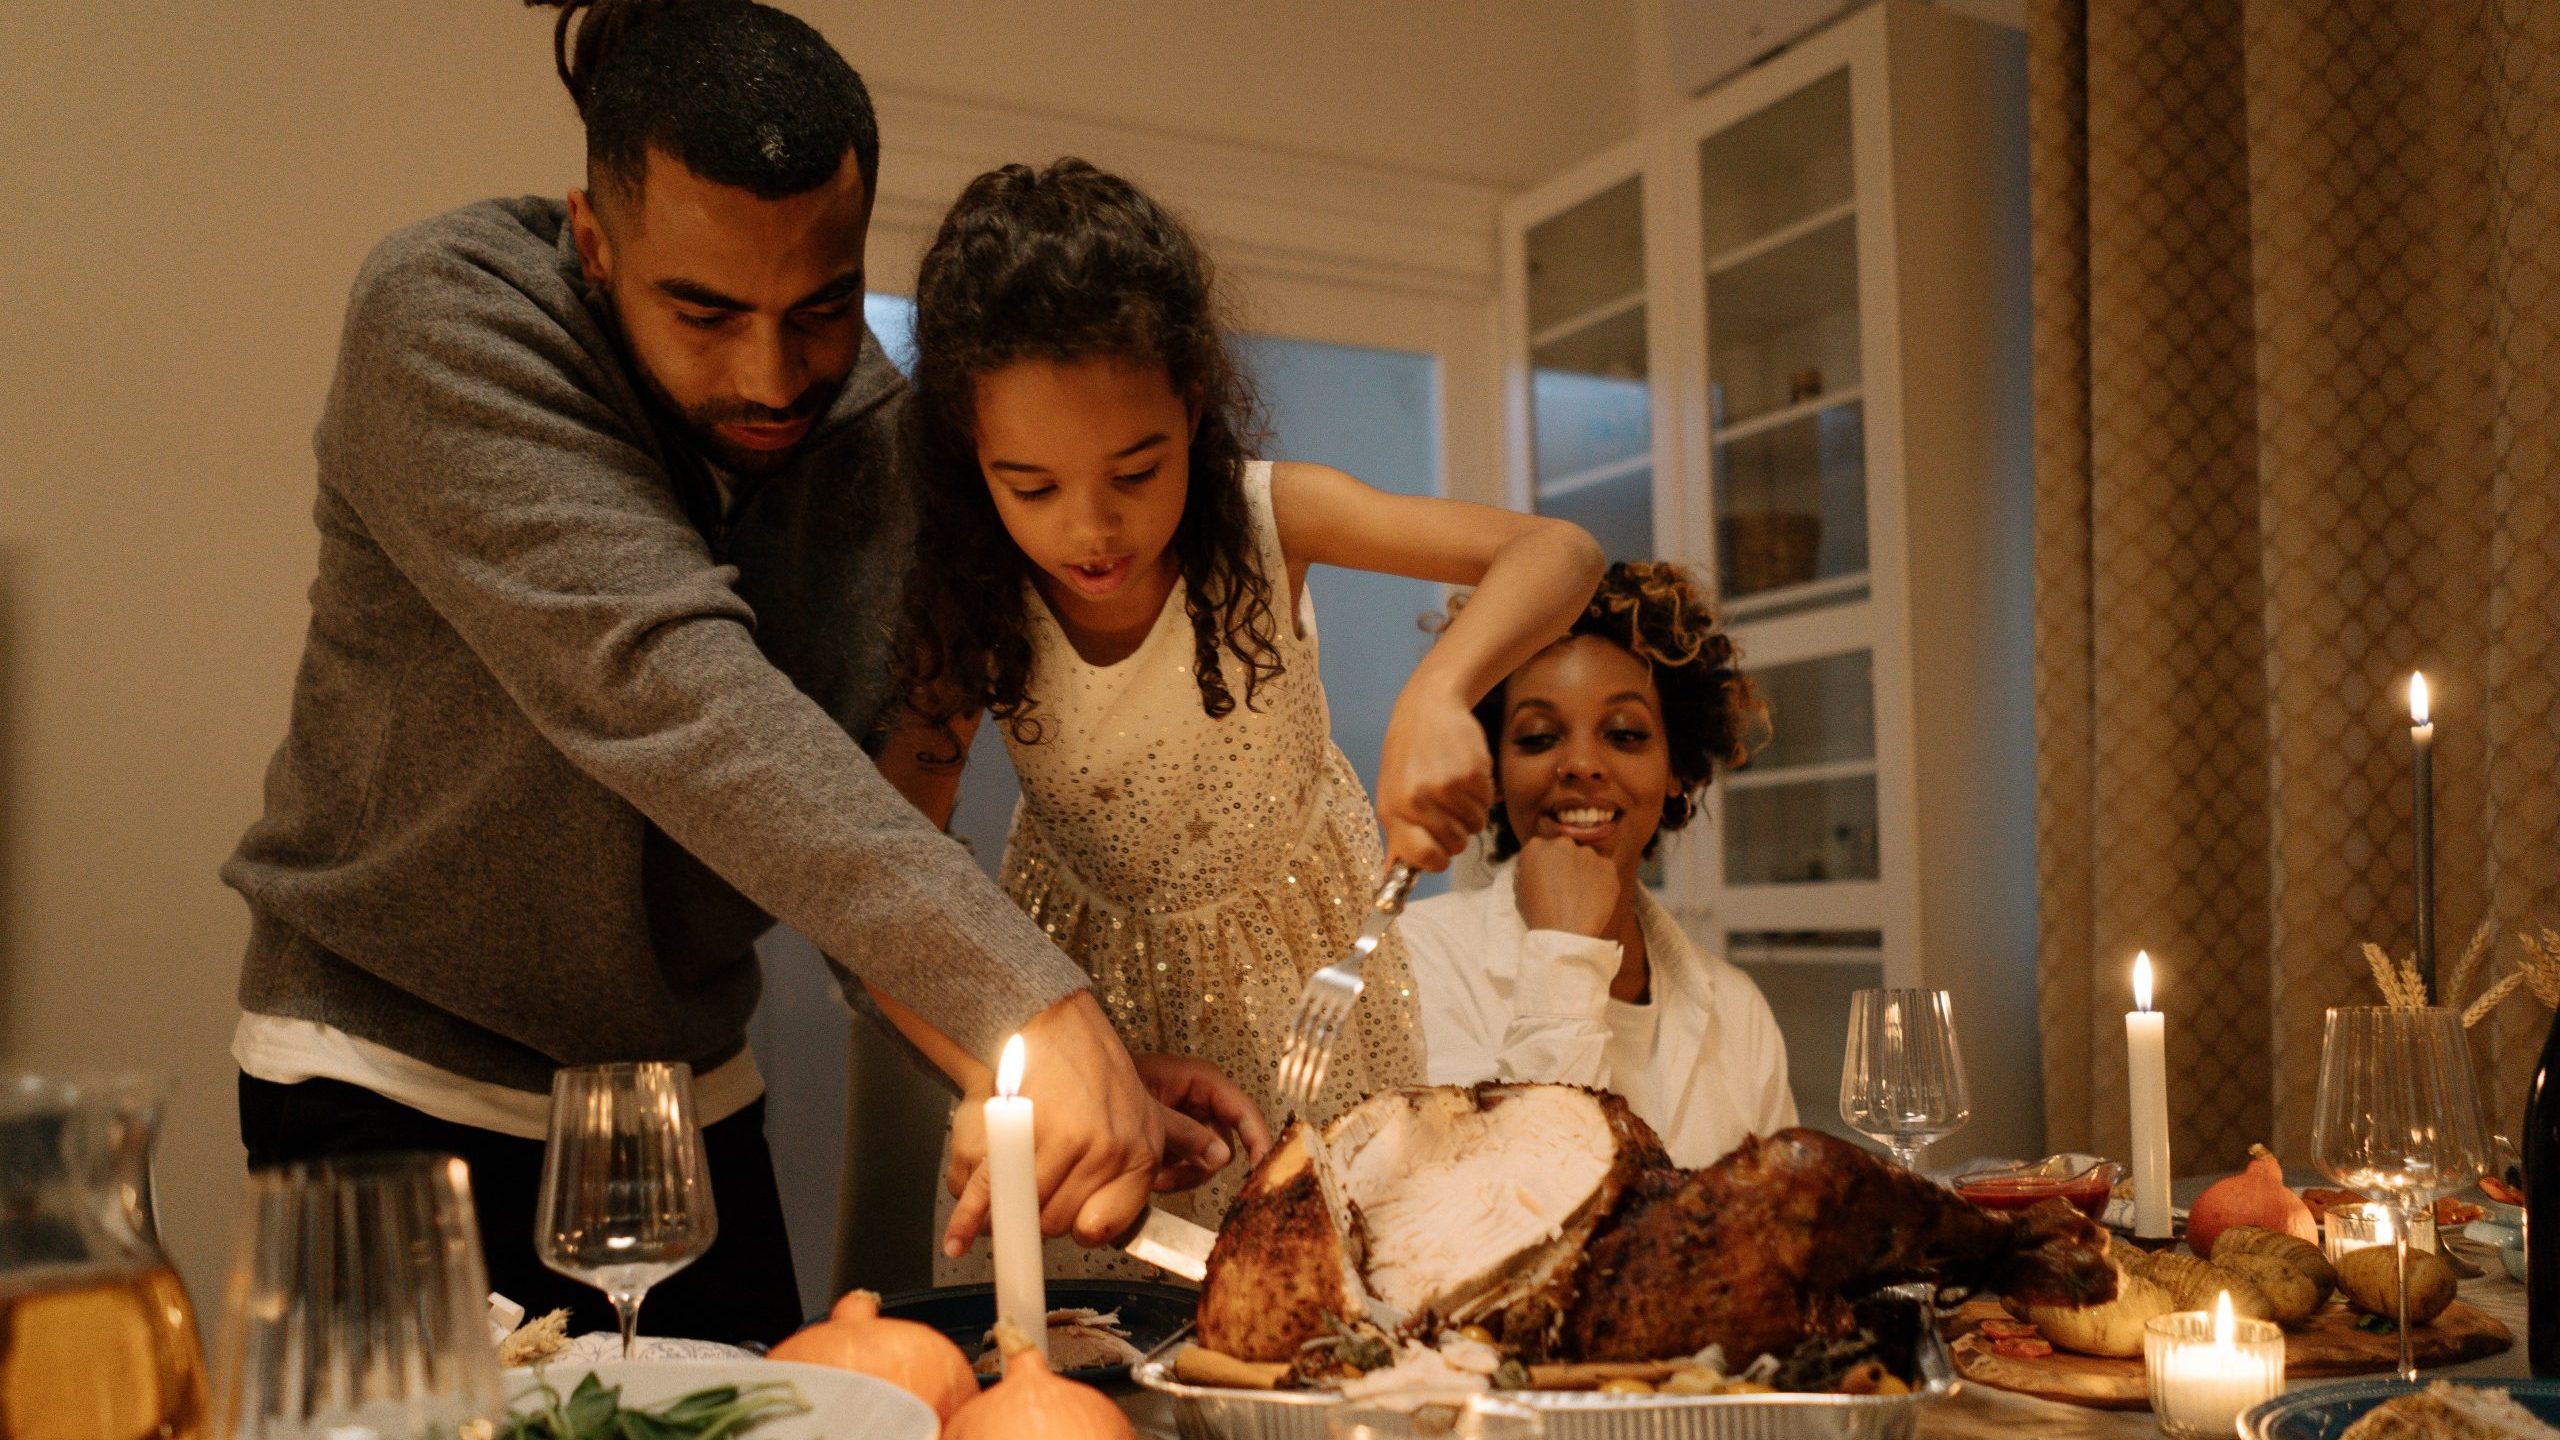 Health tips for a happy, safe, COVID-free Thanksgiving